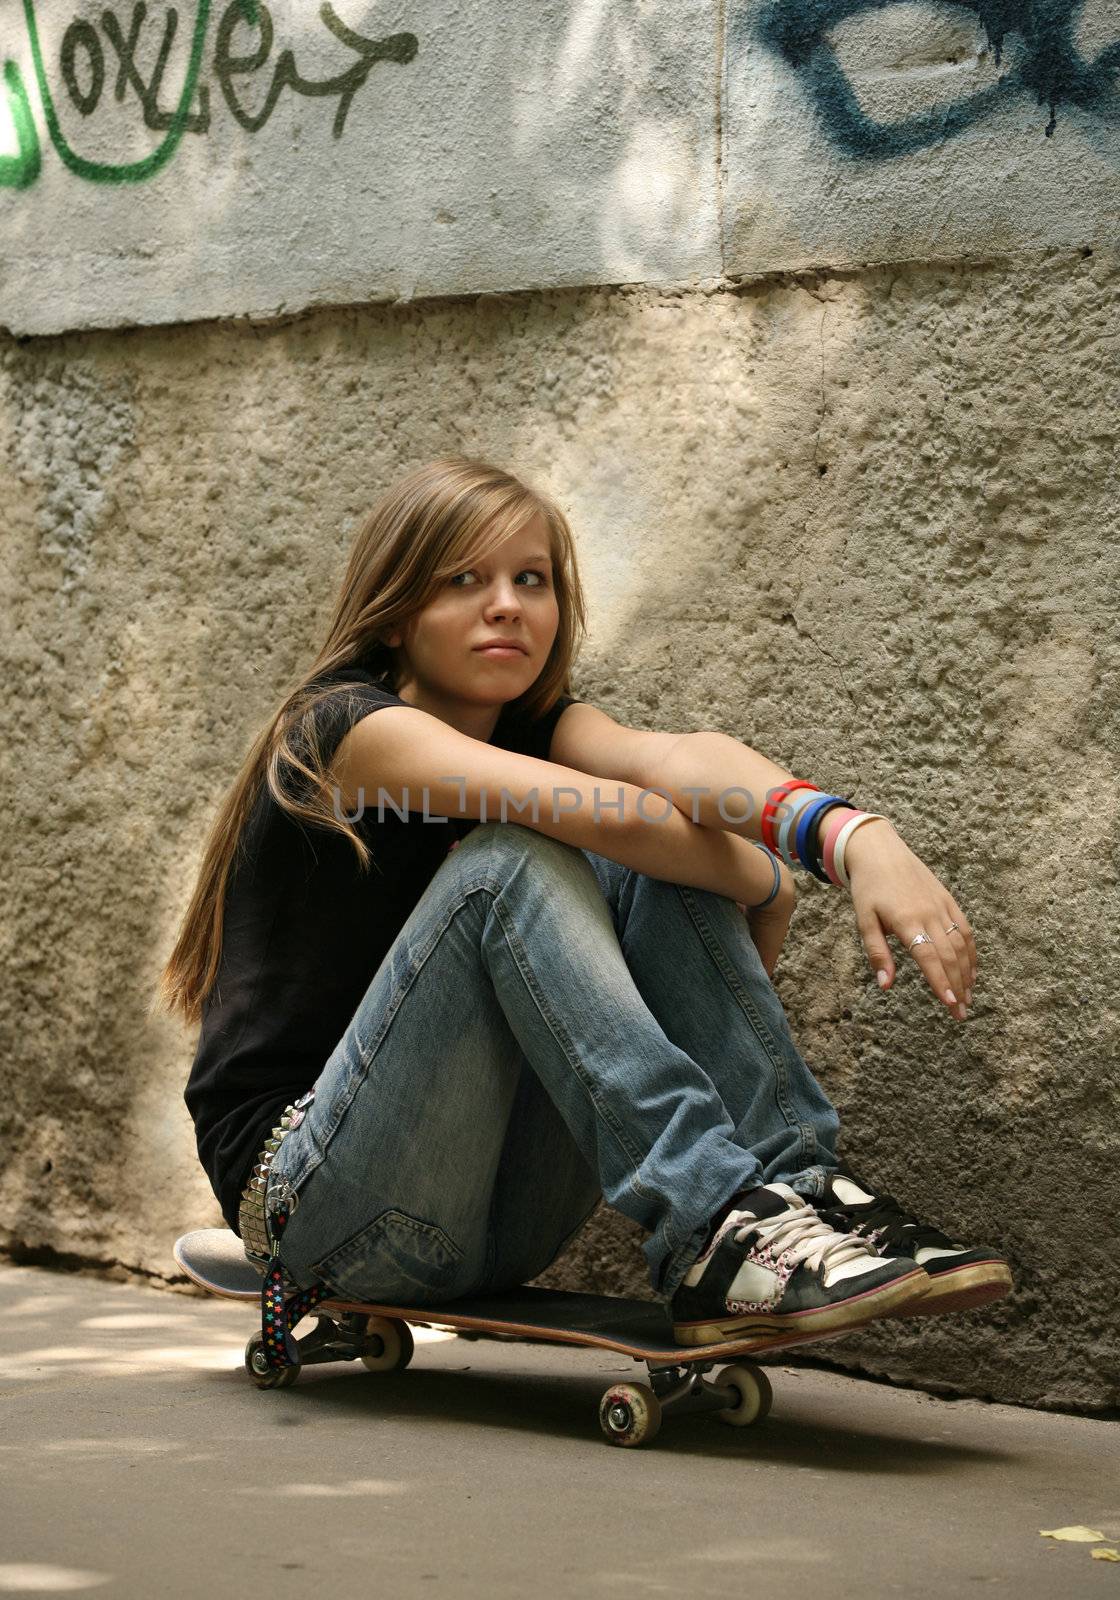 The girl with skateboard sitting against a wall